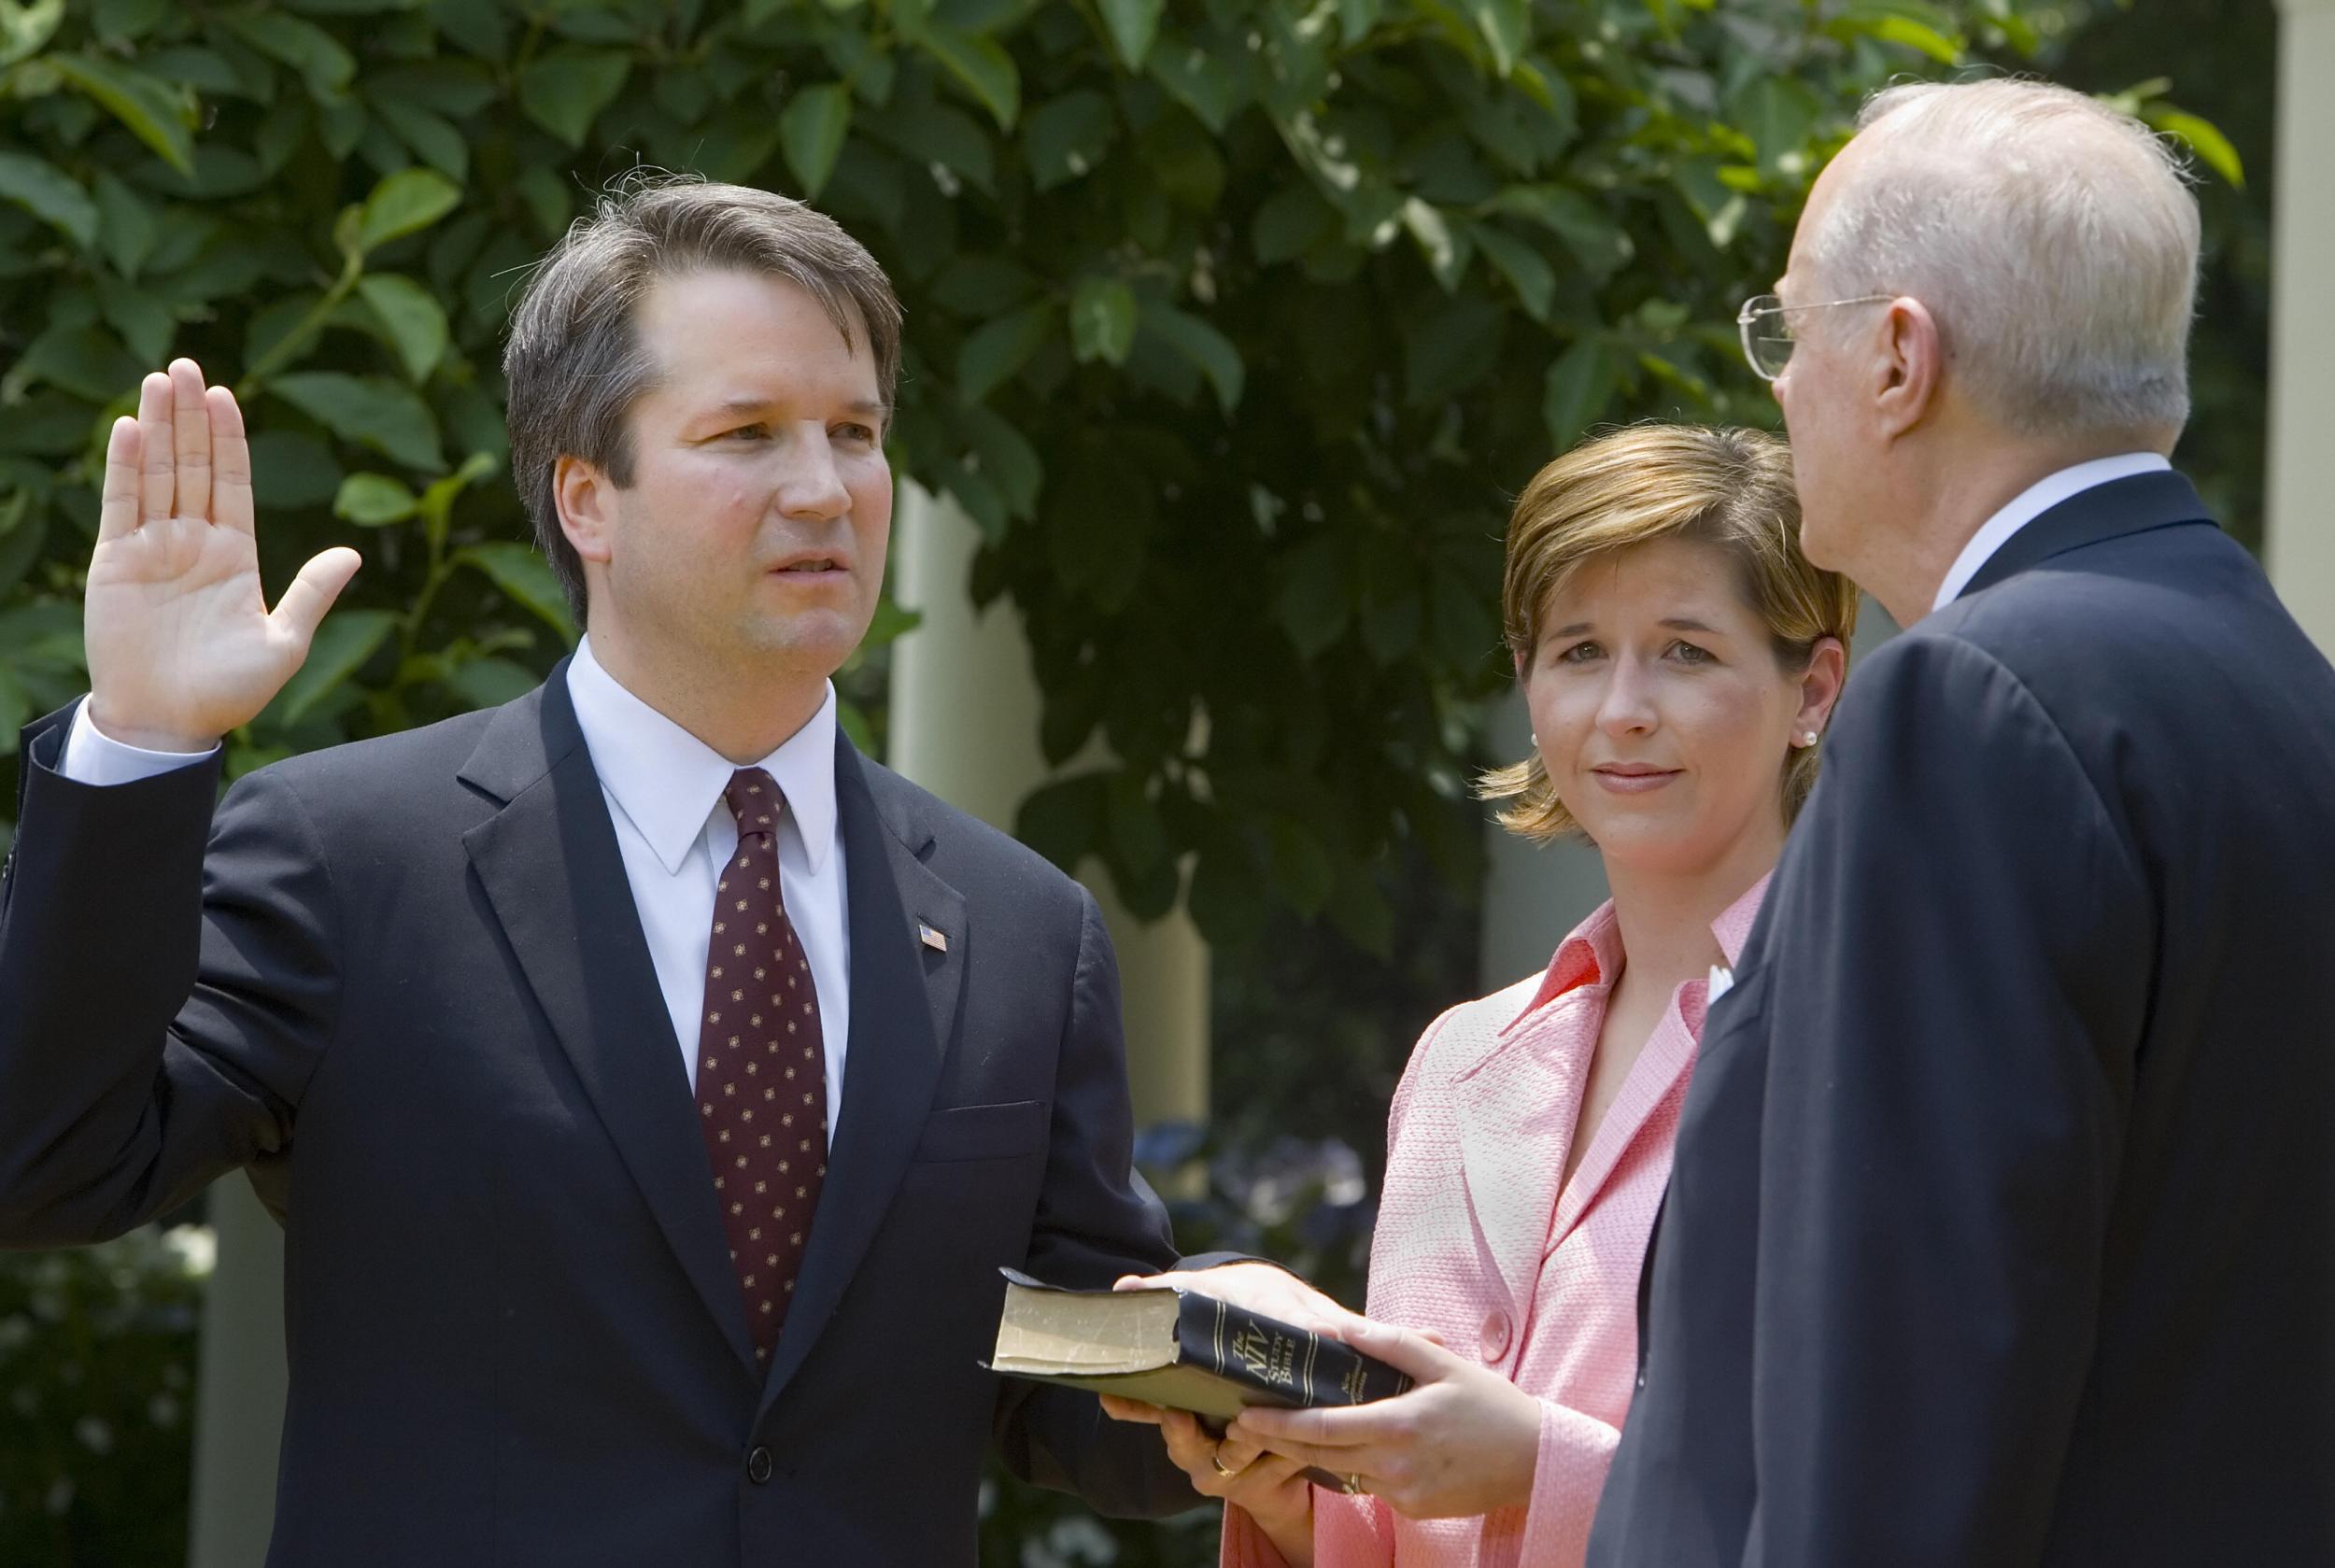 Brett Kavanaugh swearing in as US Court of Appeals Judge for the District of Columbia